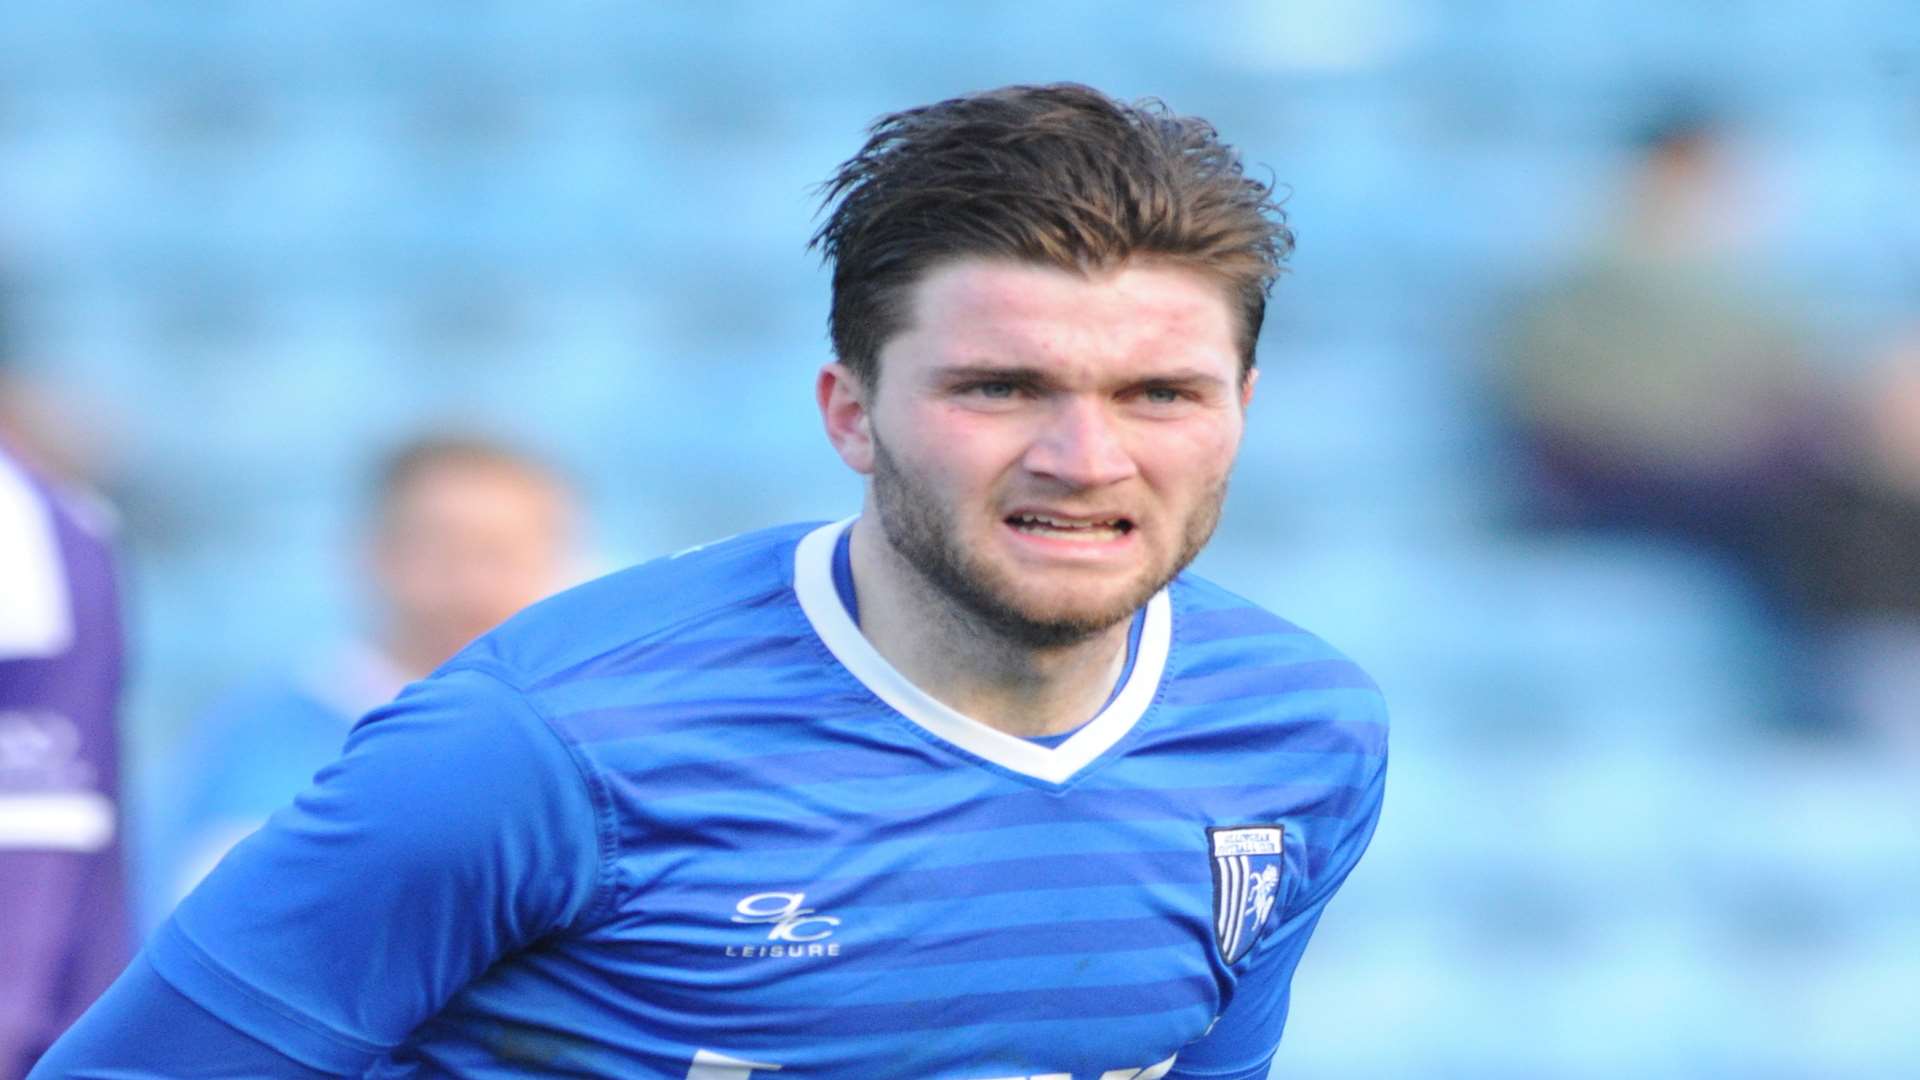 Olly Muldoon playing for the Gills on trial Picture: Steve Crispe